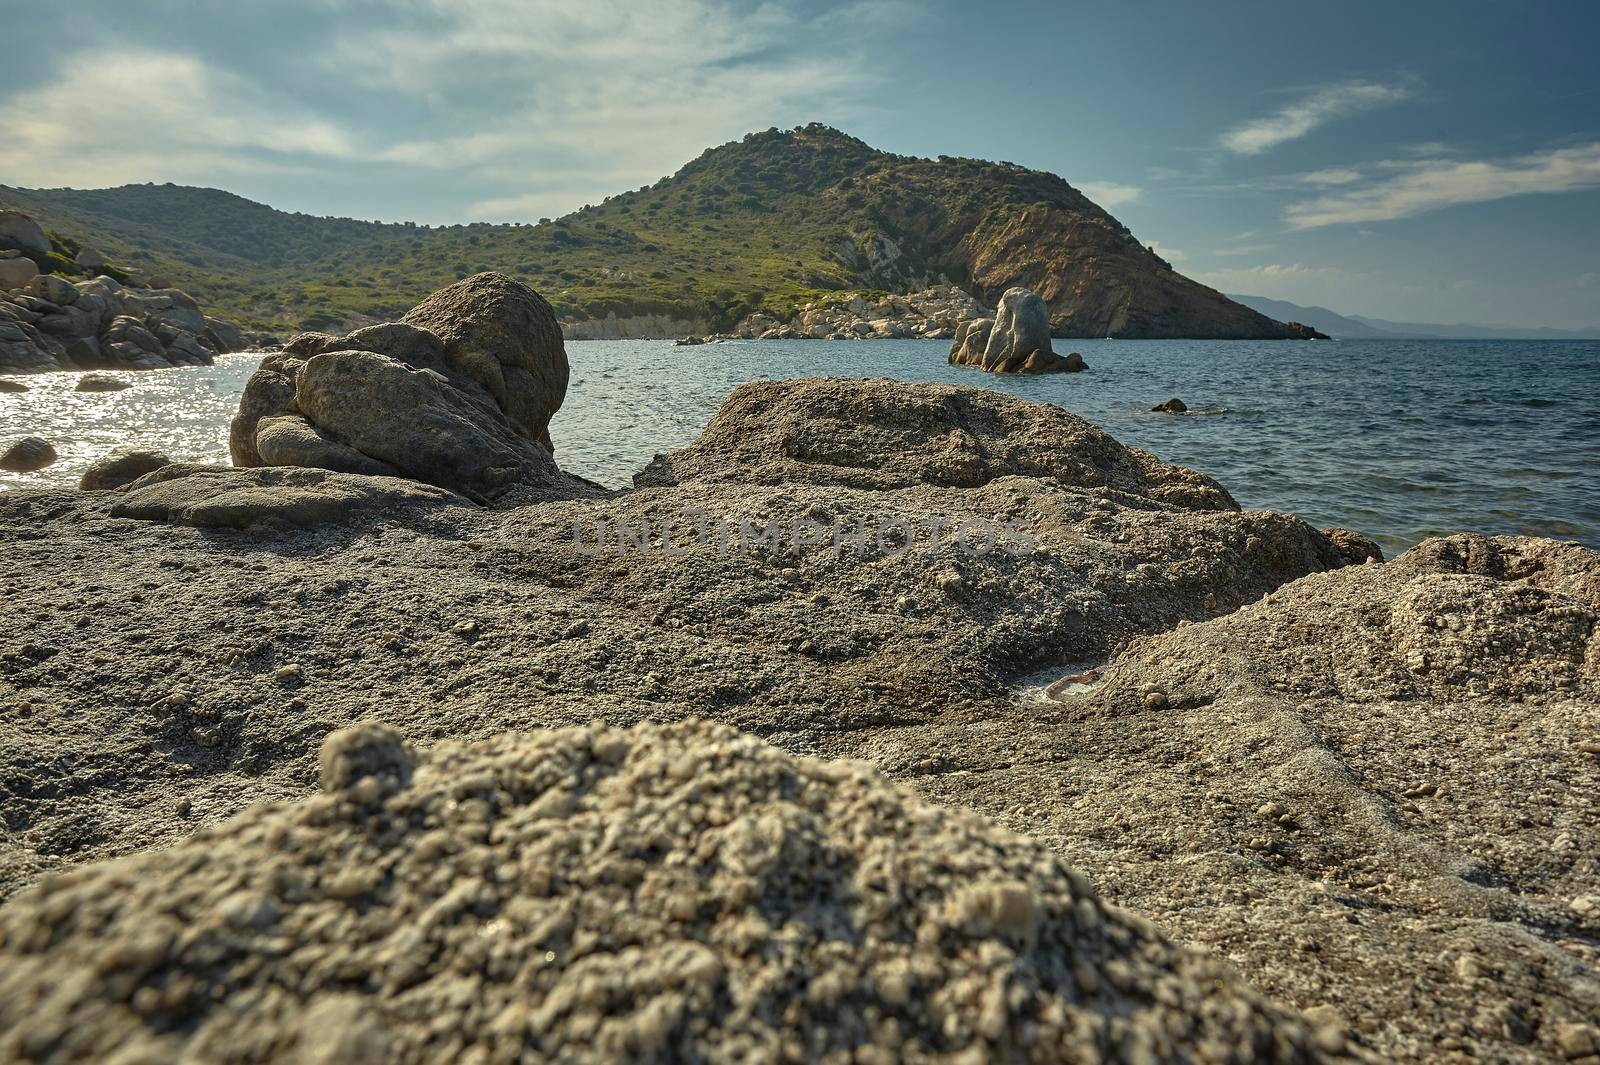 Background of a panorama including a rocky beach with the sea and the mountains full of Mediterranean vegetation in the background.